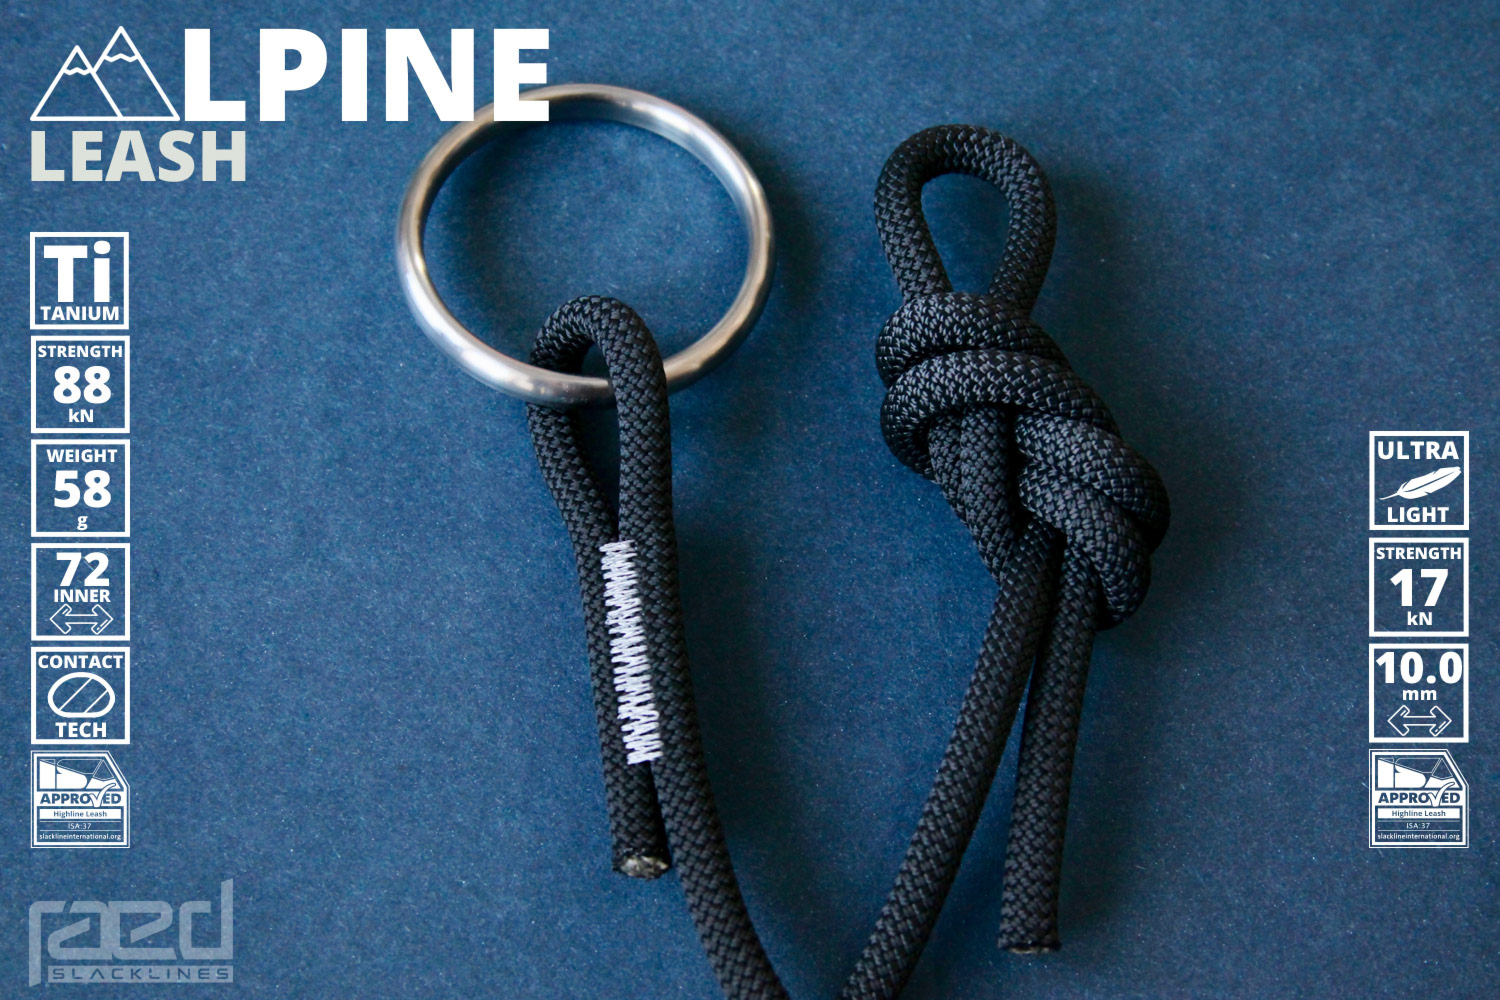 Highline Leashes for advanced highliners and beginners